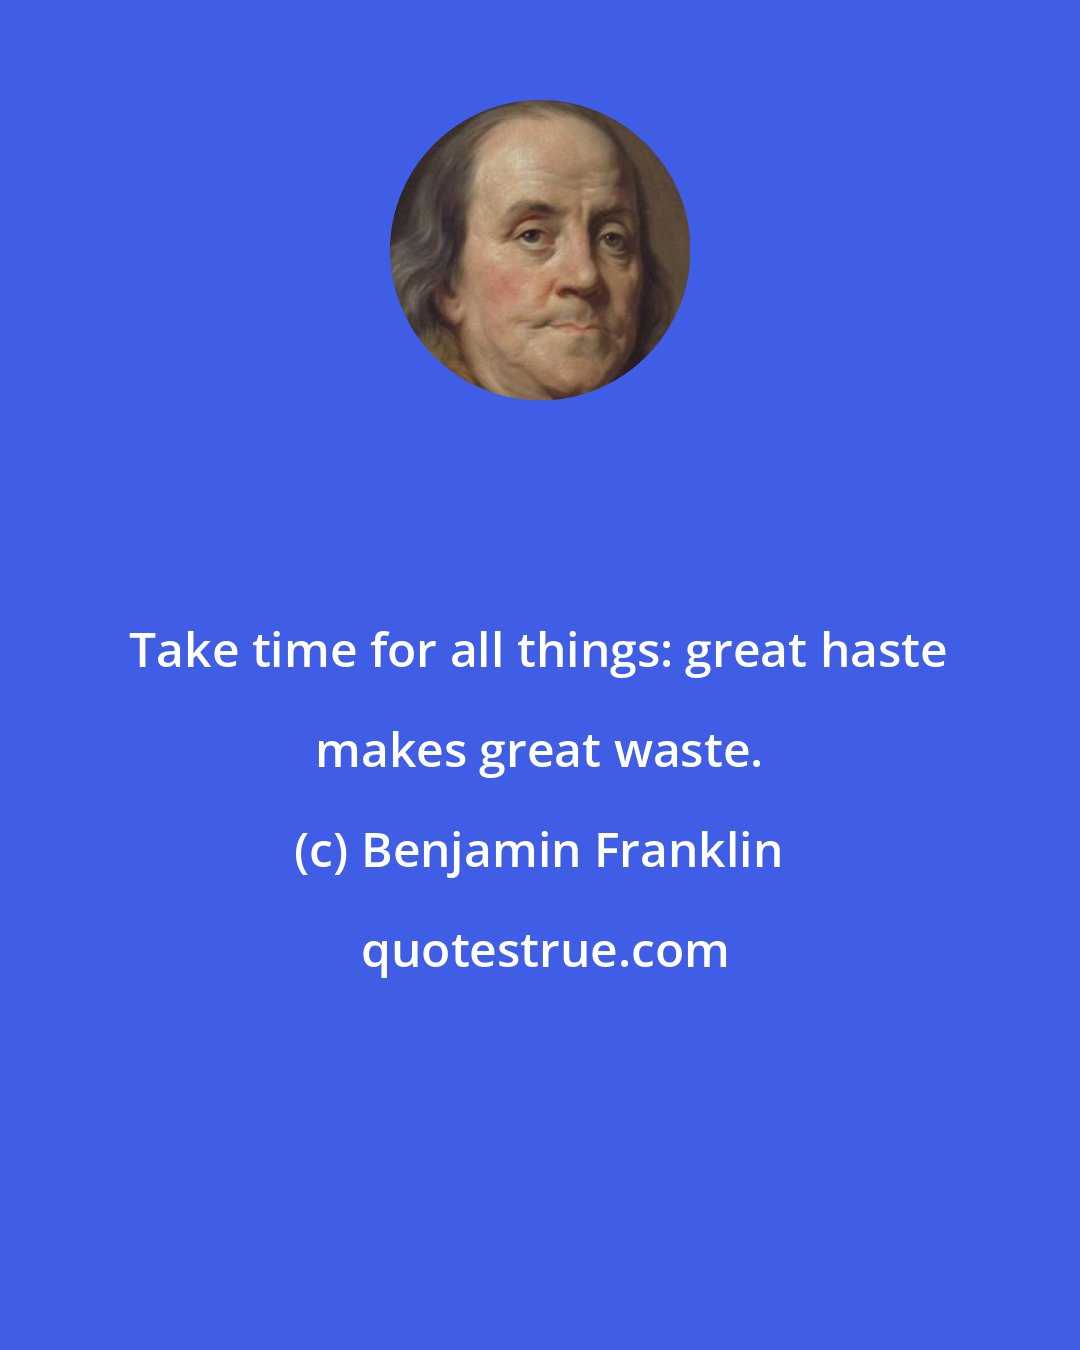 Benjamin Franklin: Take time for all things: great haste makes great waste.